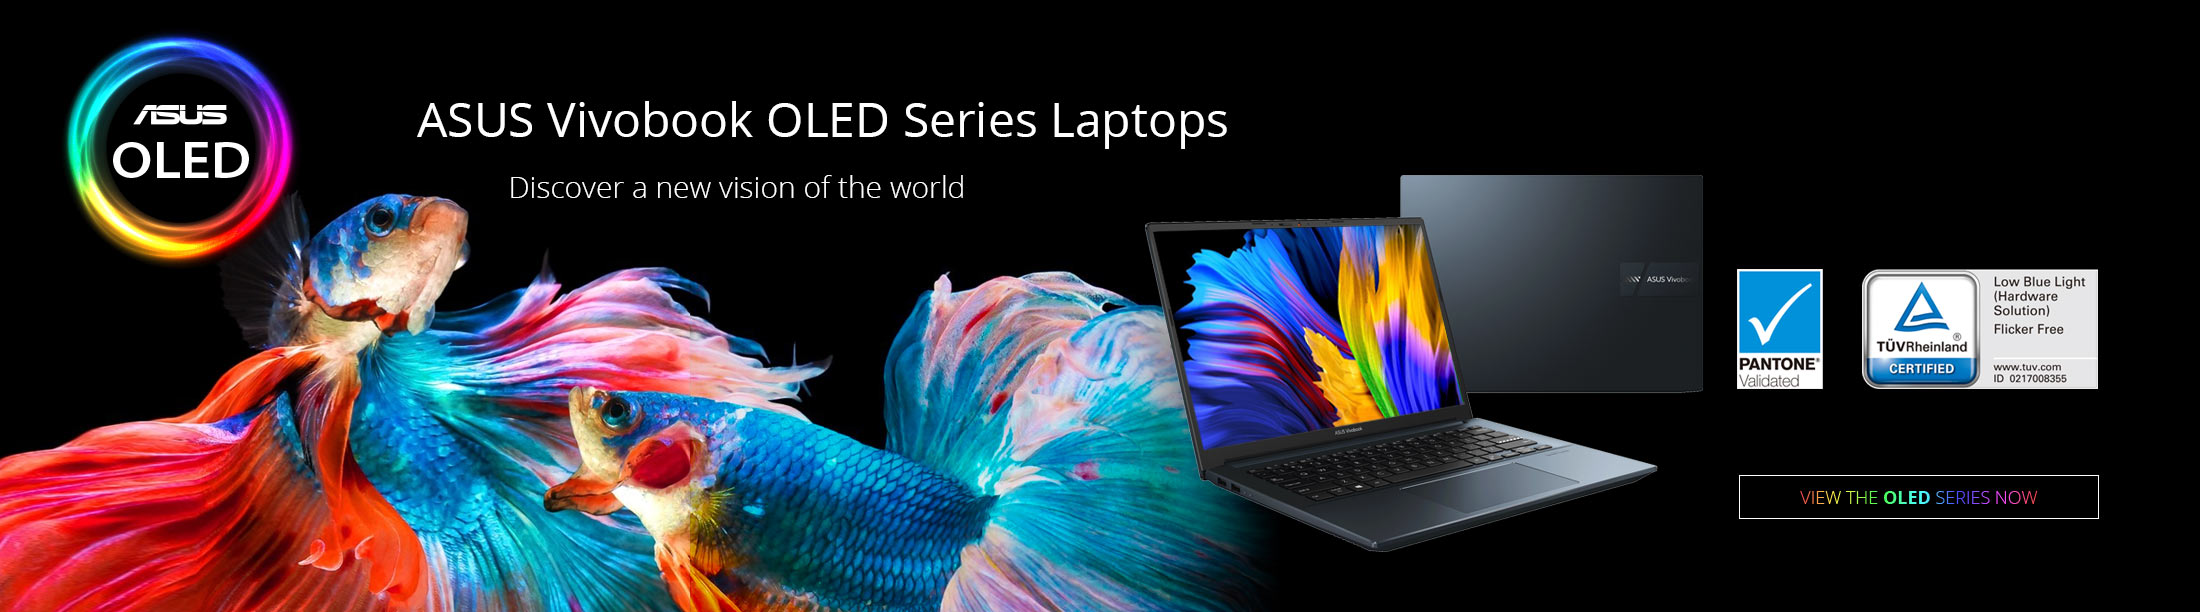 ASUS Vivobook OLED Series Laptops - Discover a new vision of the world